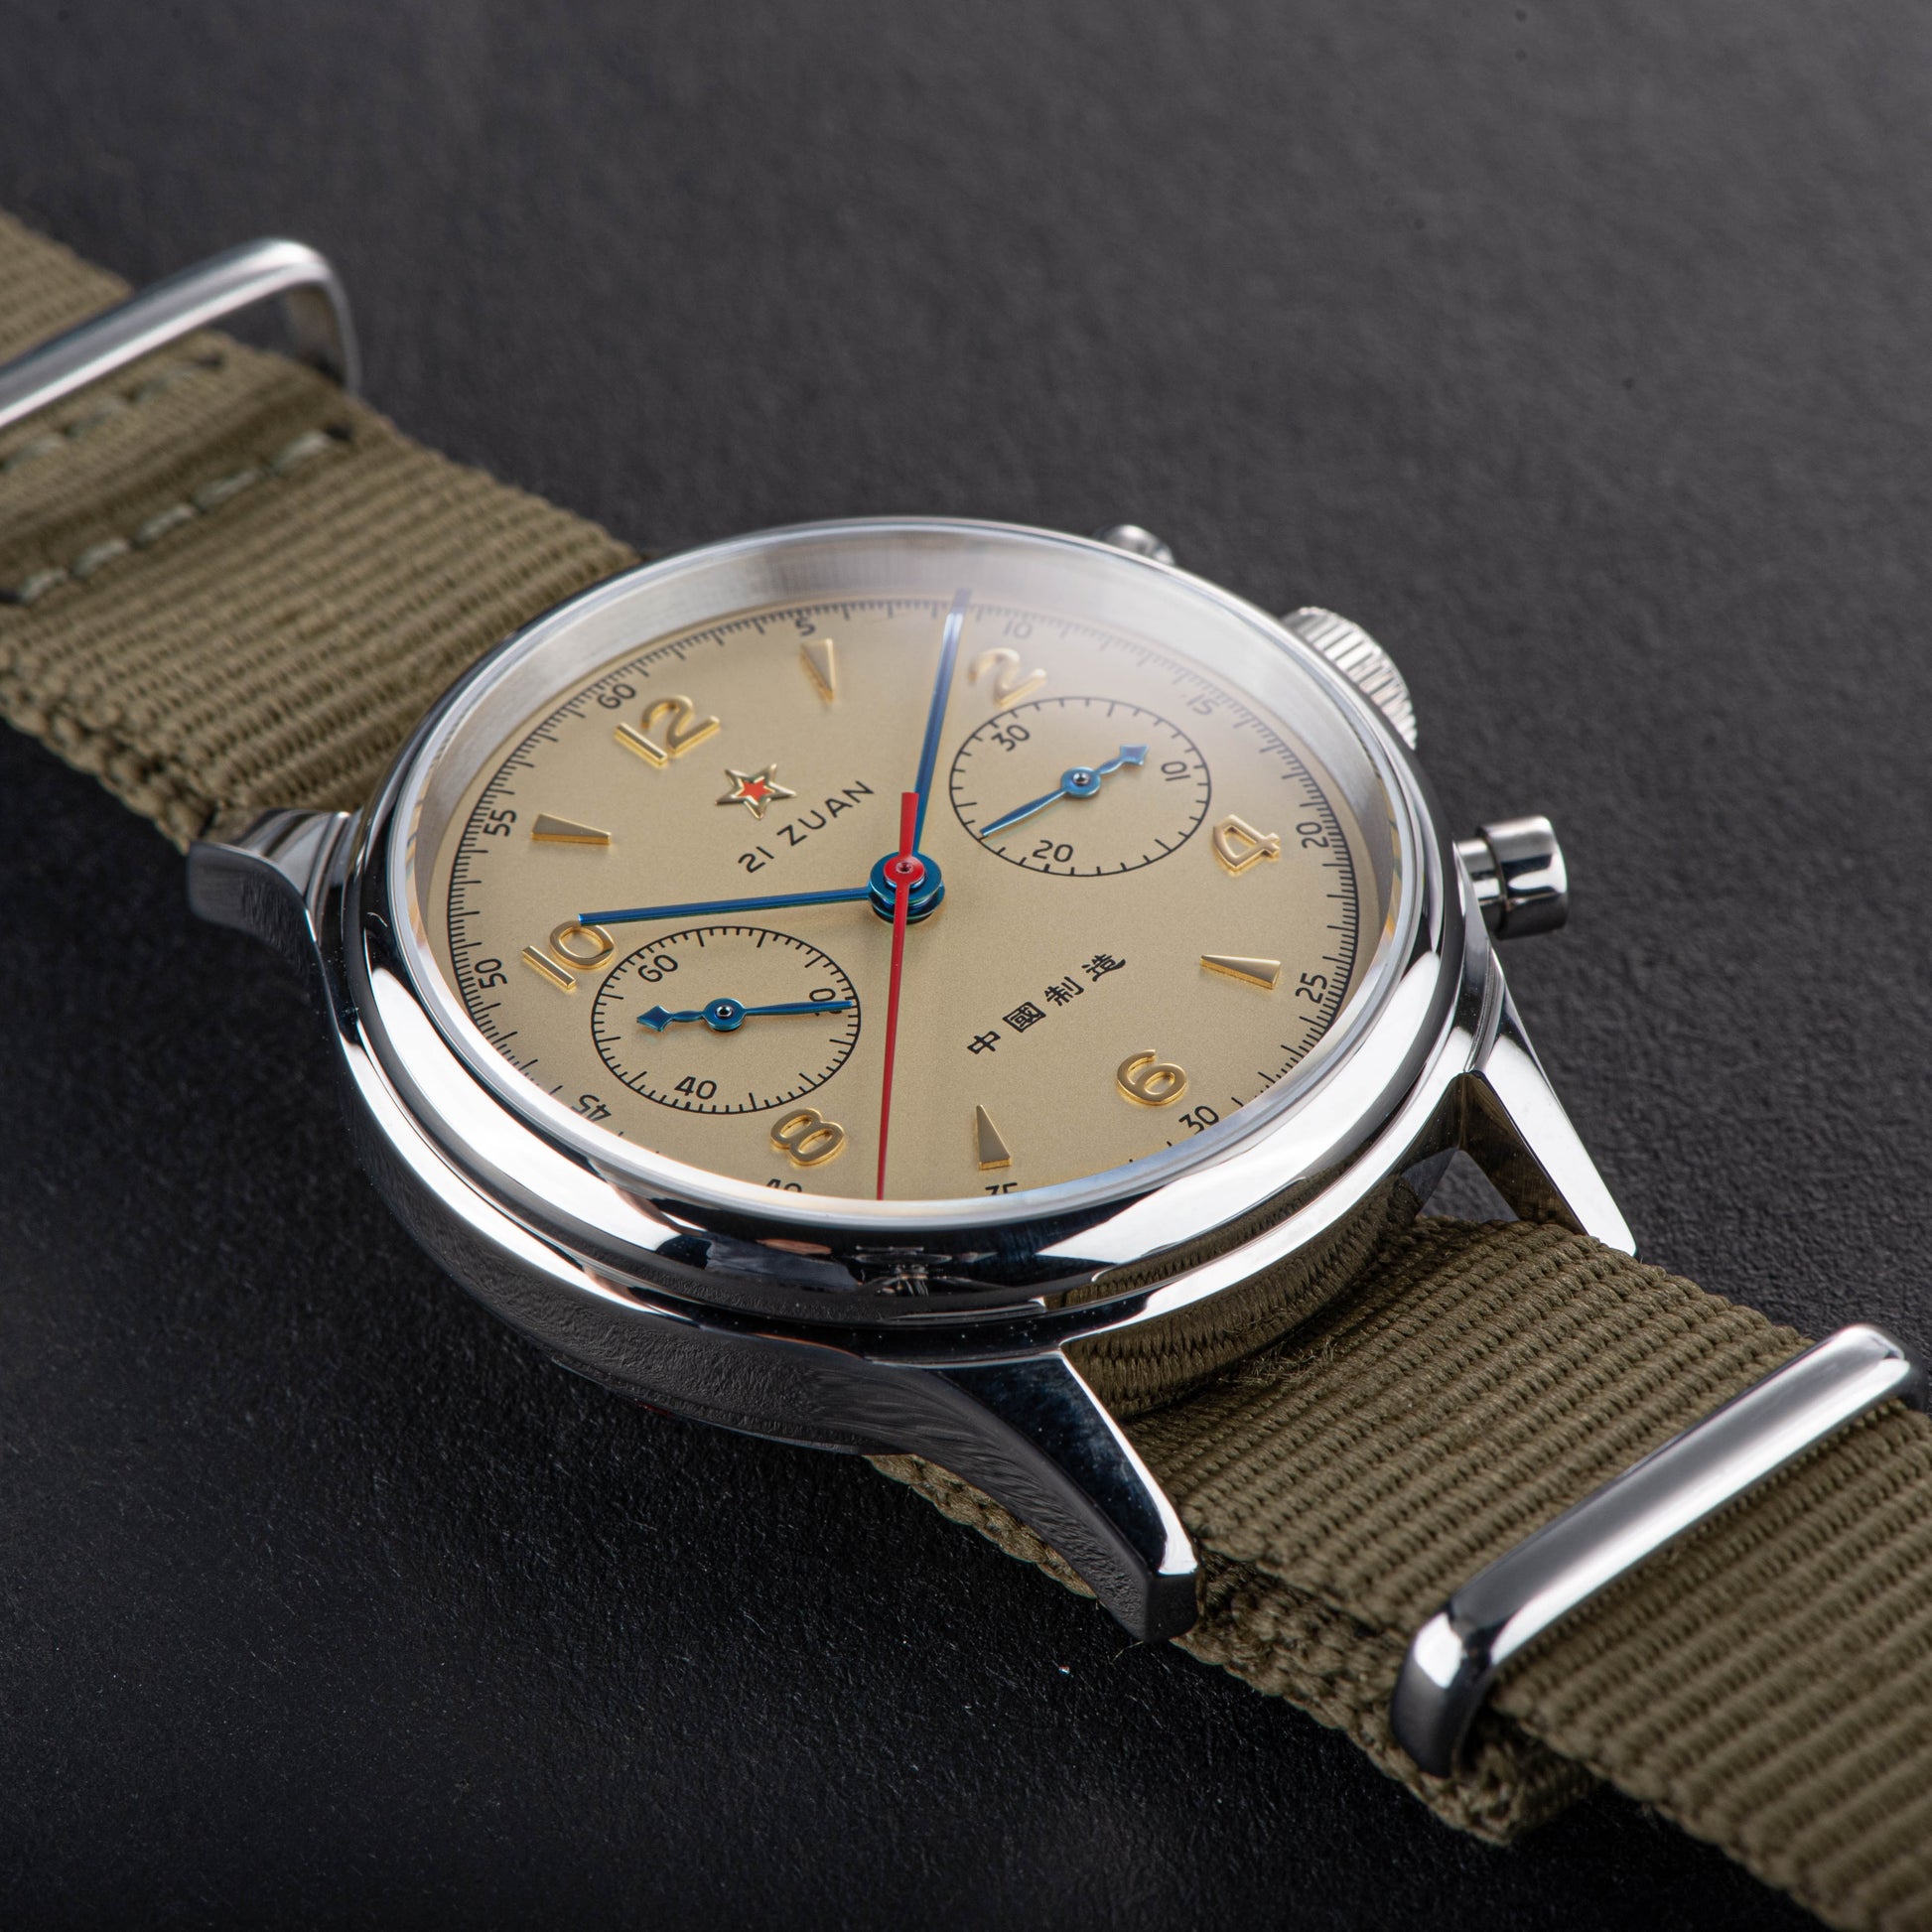 SOLD 2020 NEW Seagull 1963 Chronograph - Birth Year Watches